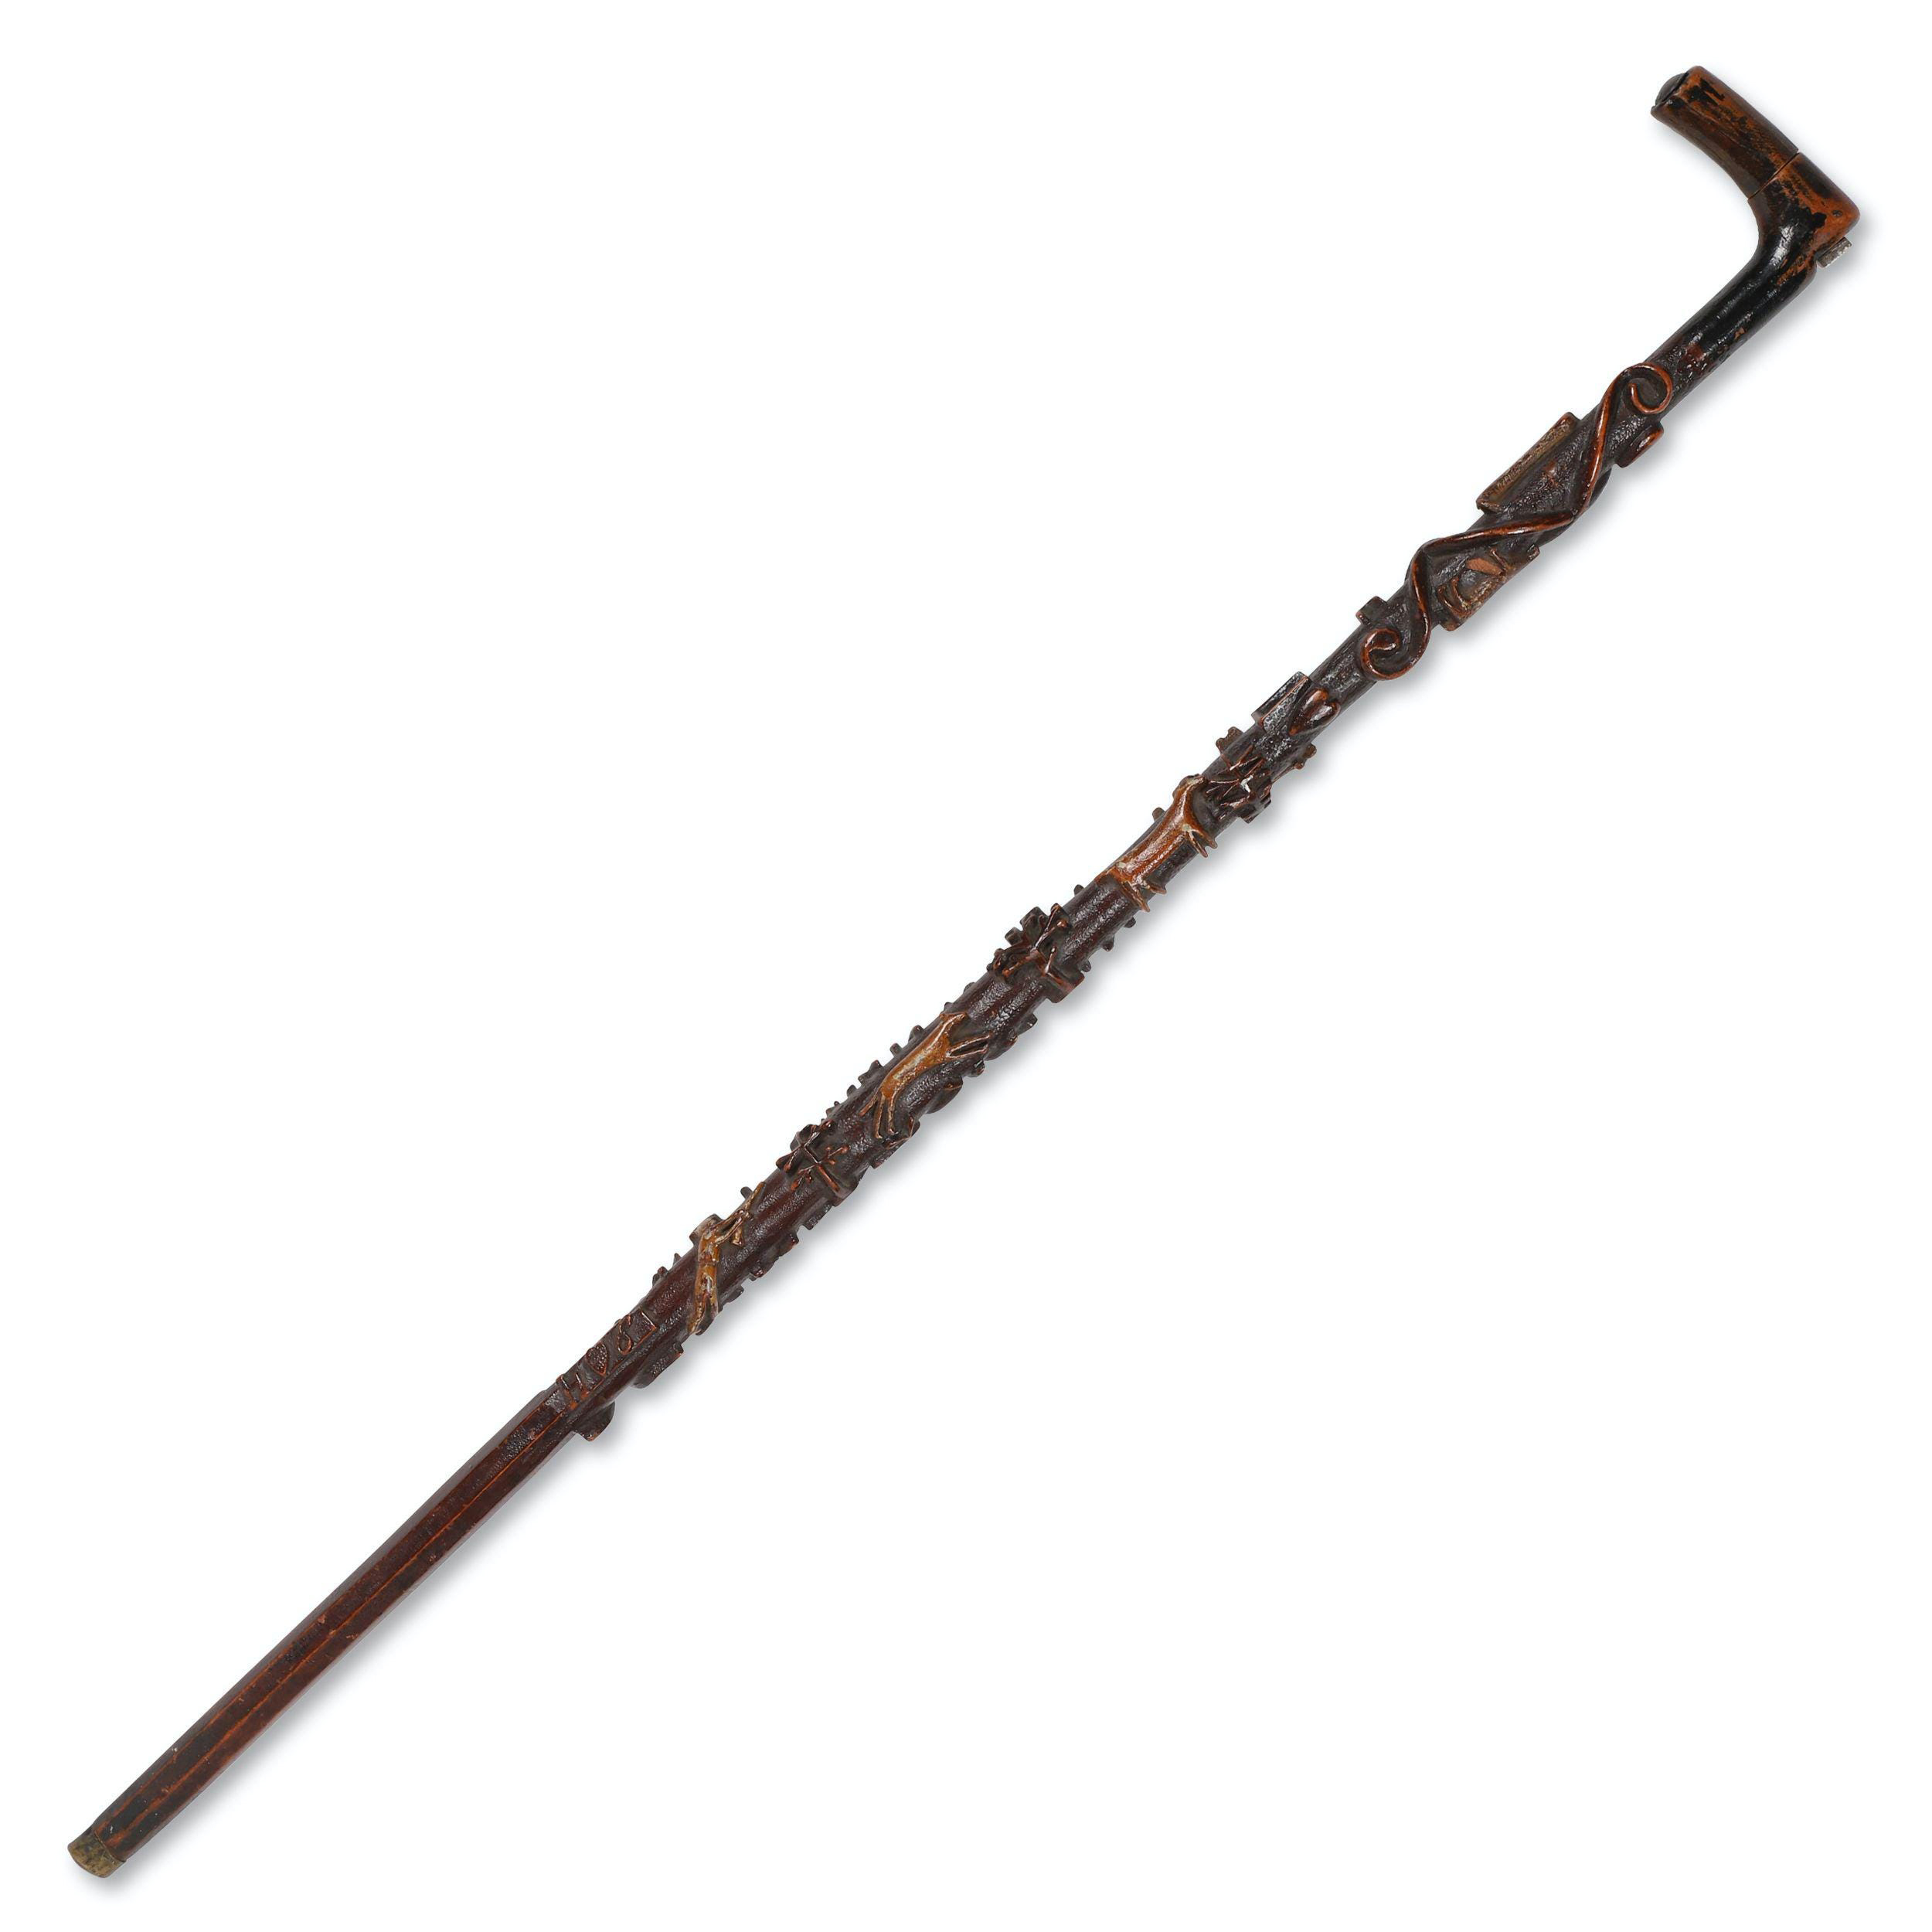 Allegorical walking stick with carved details, circa 1870-1880, estimated at $3,000-$5,000.